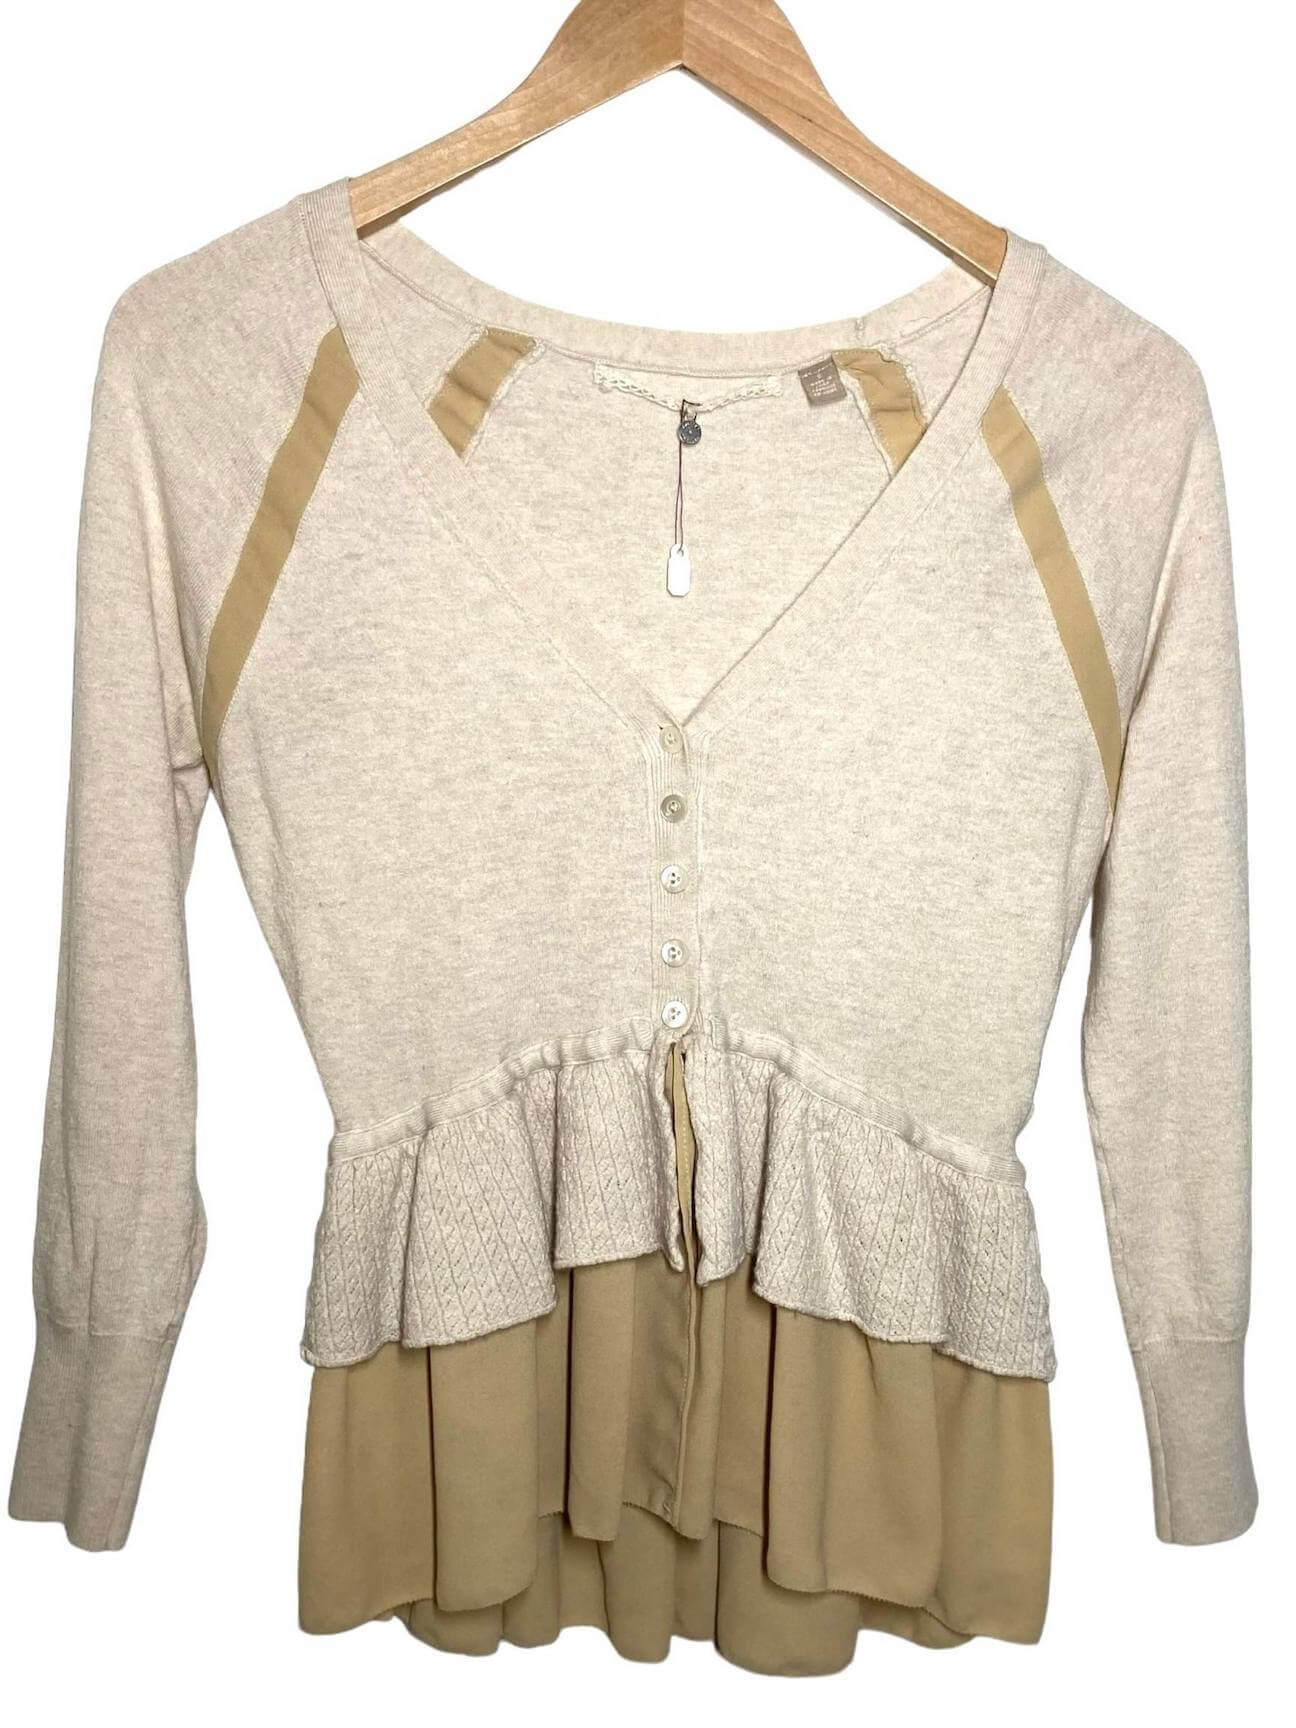 Warm Spring KNITTED AND KNOTTED for ANTHROPOLOGIE ruffle hem cardigan sweater